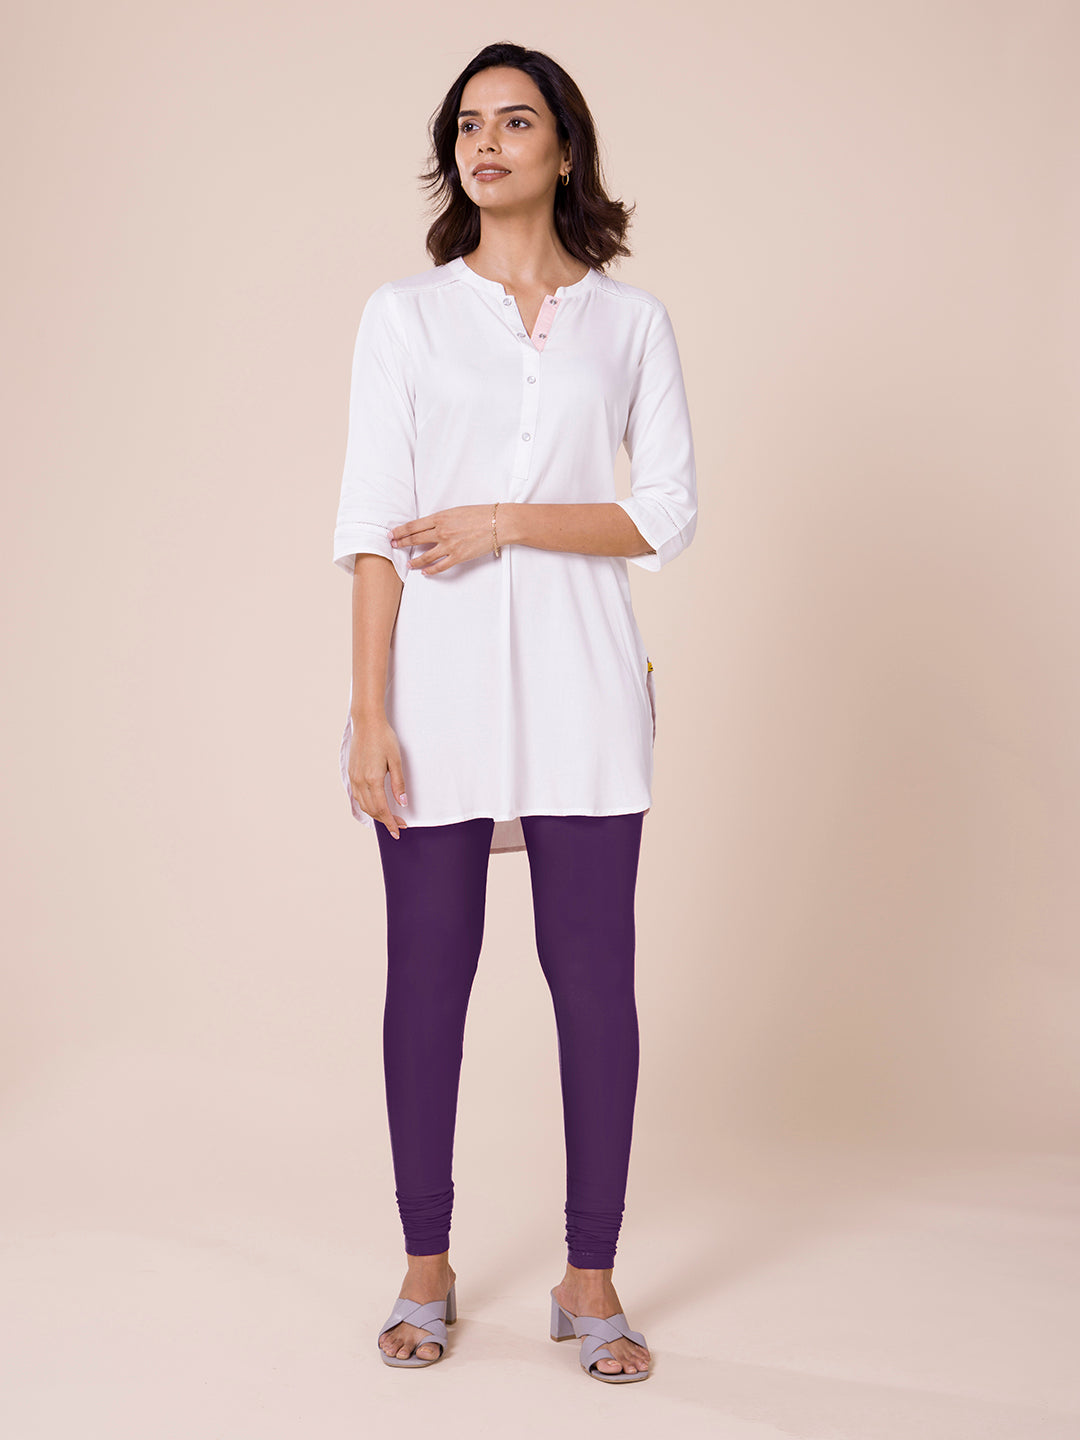 Buy online Cotton Legging Purple Color from Capris & Leggings for Women by Go  Colors for ₹449 at 0% off